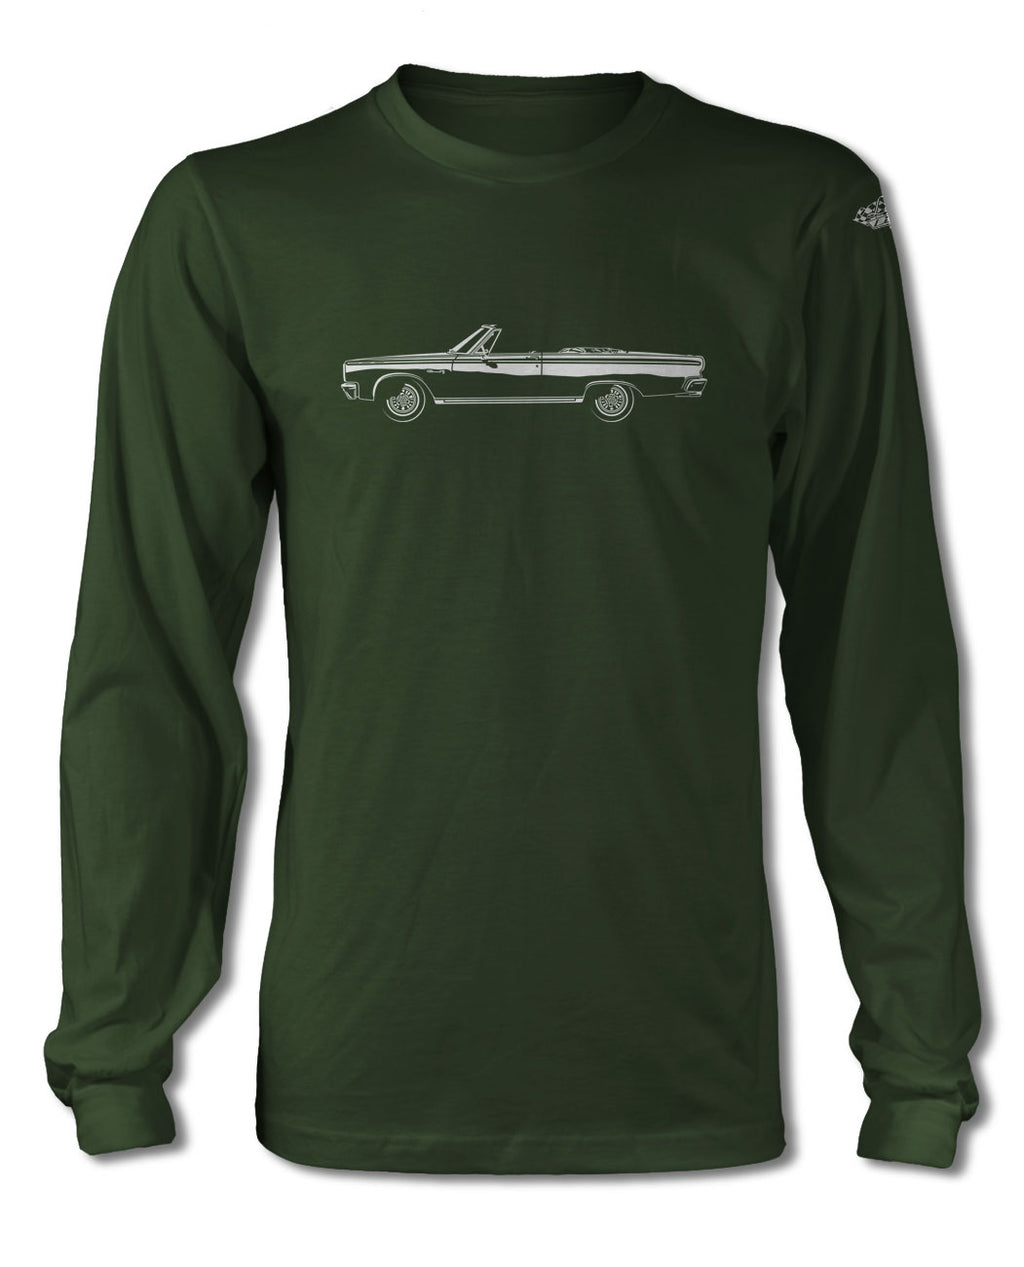 1965 Dodge Coronet 500 Convertible T-Shirt - Long Sleeves - Side View